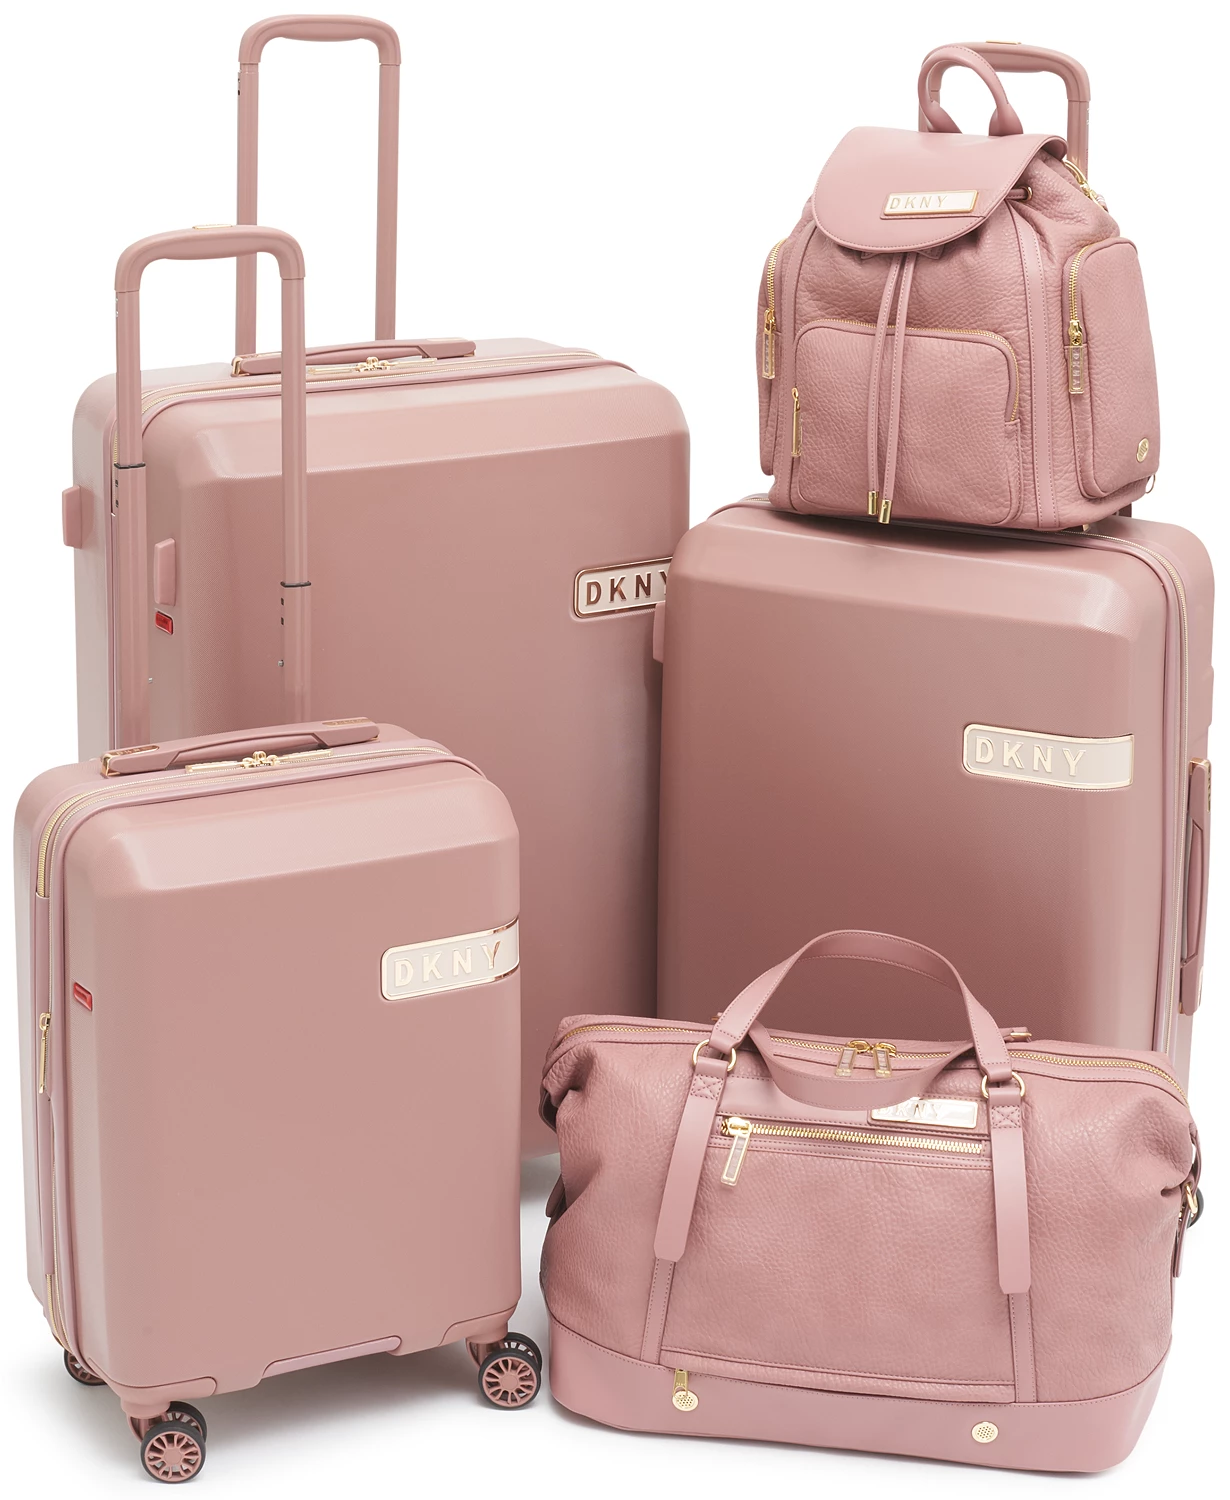 DKNY: Rapture Luggage Collection $82.49